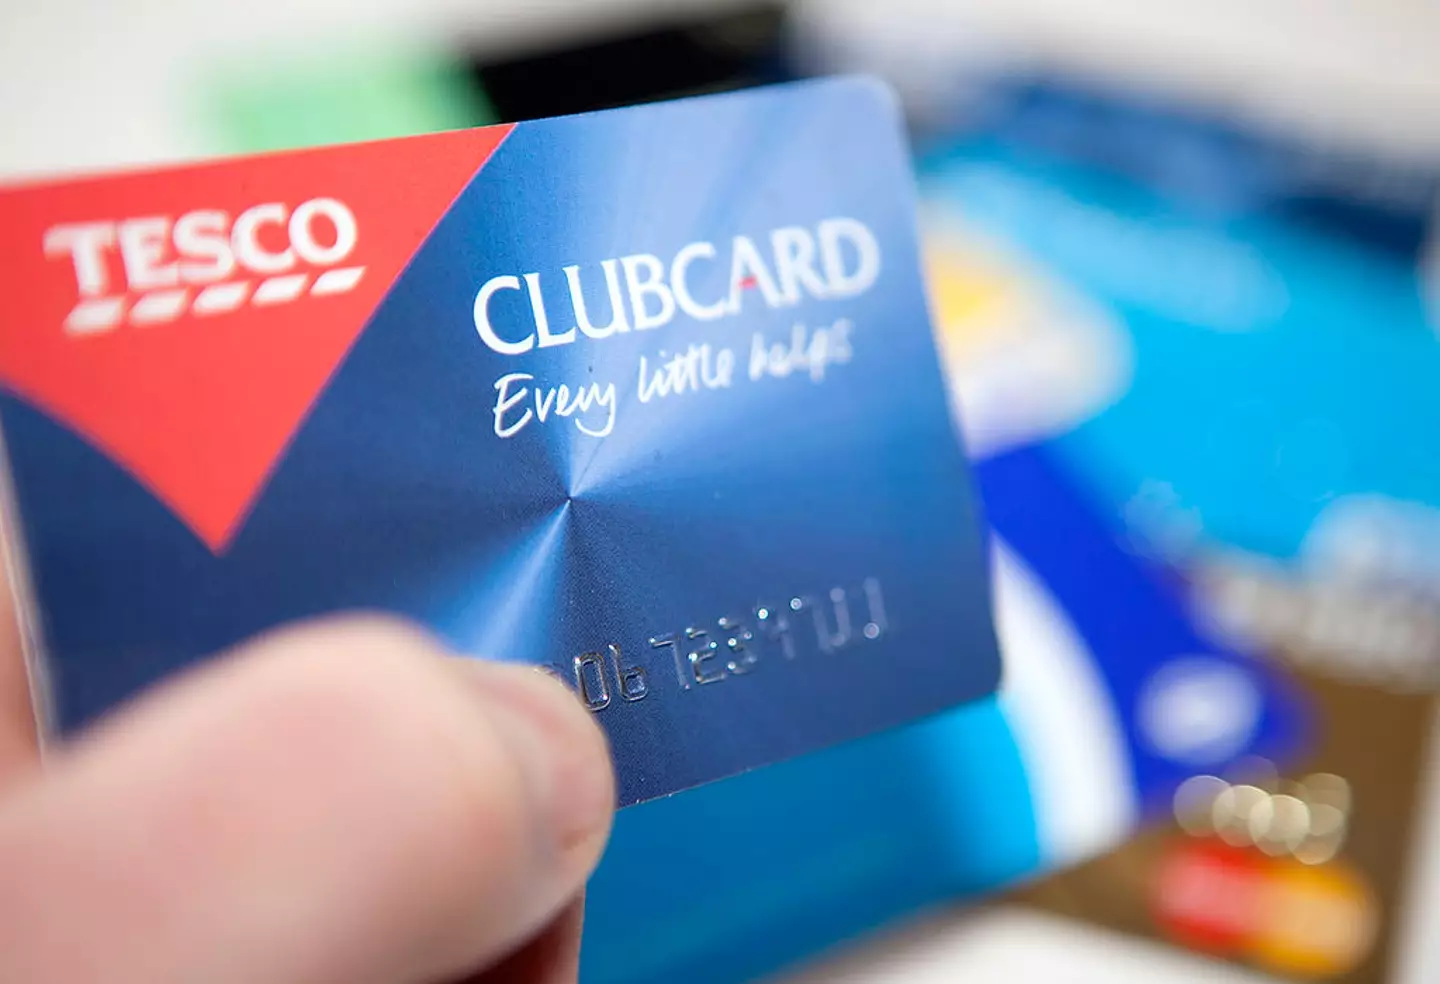 You can use your Clubcard to get free pints.